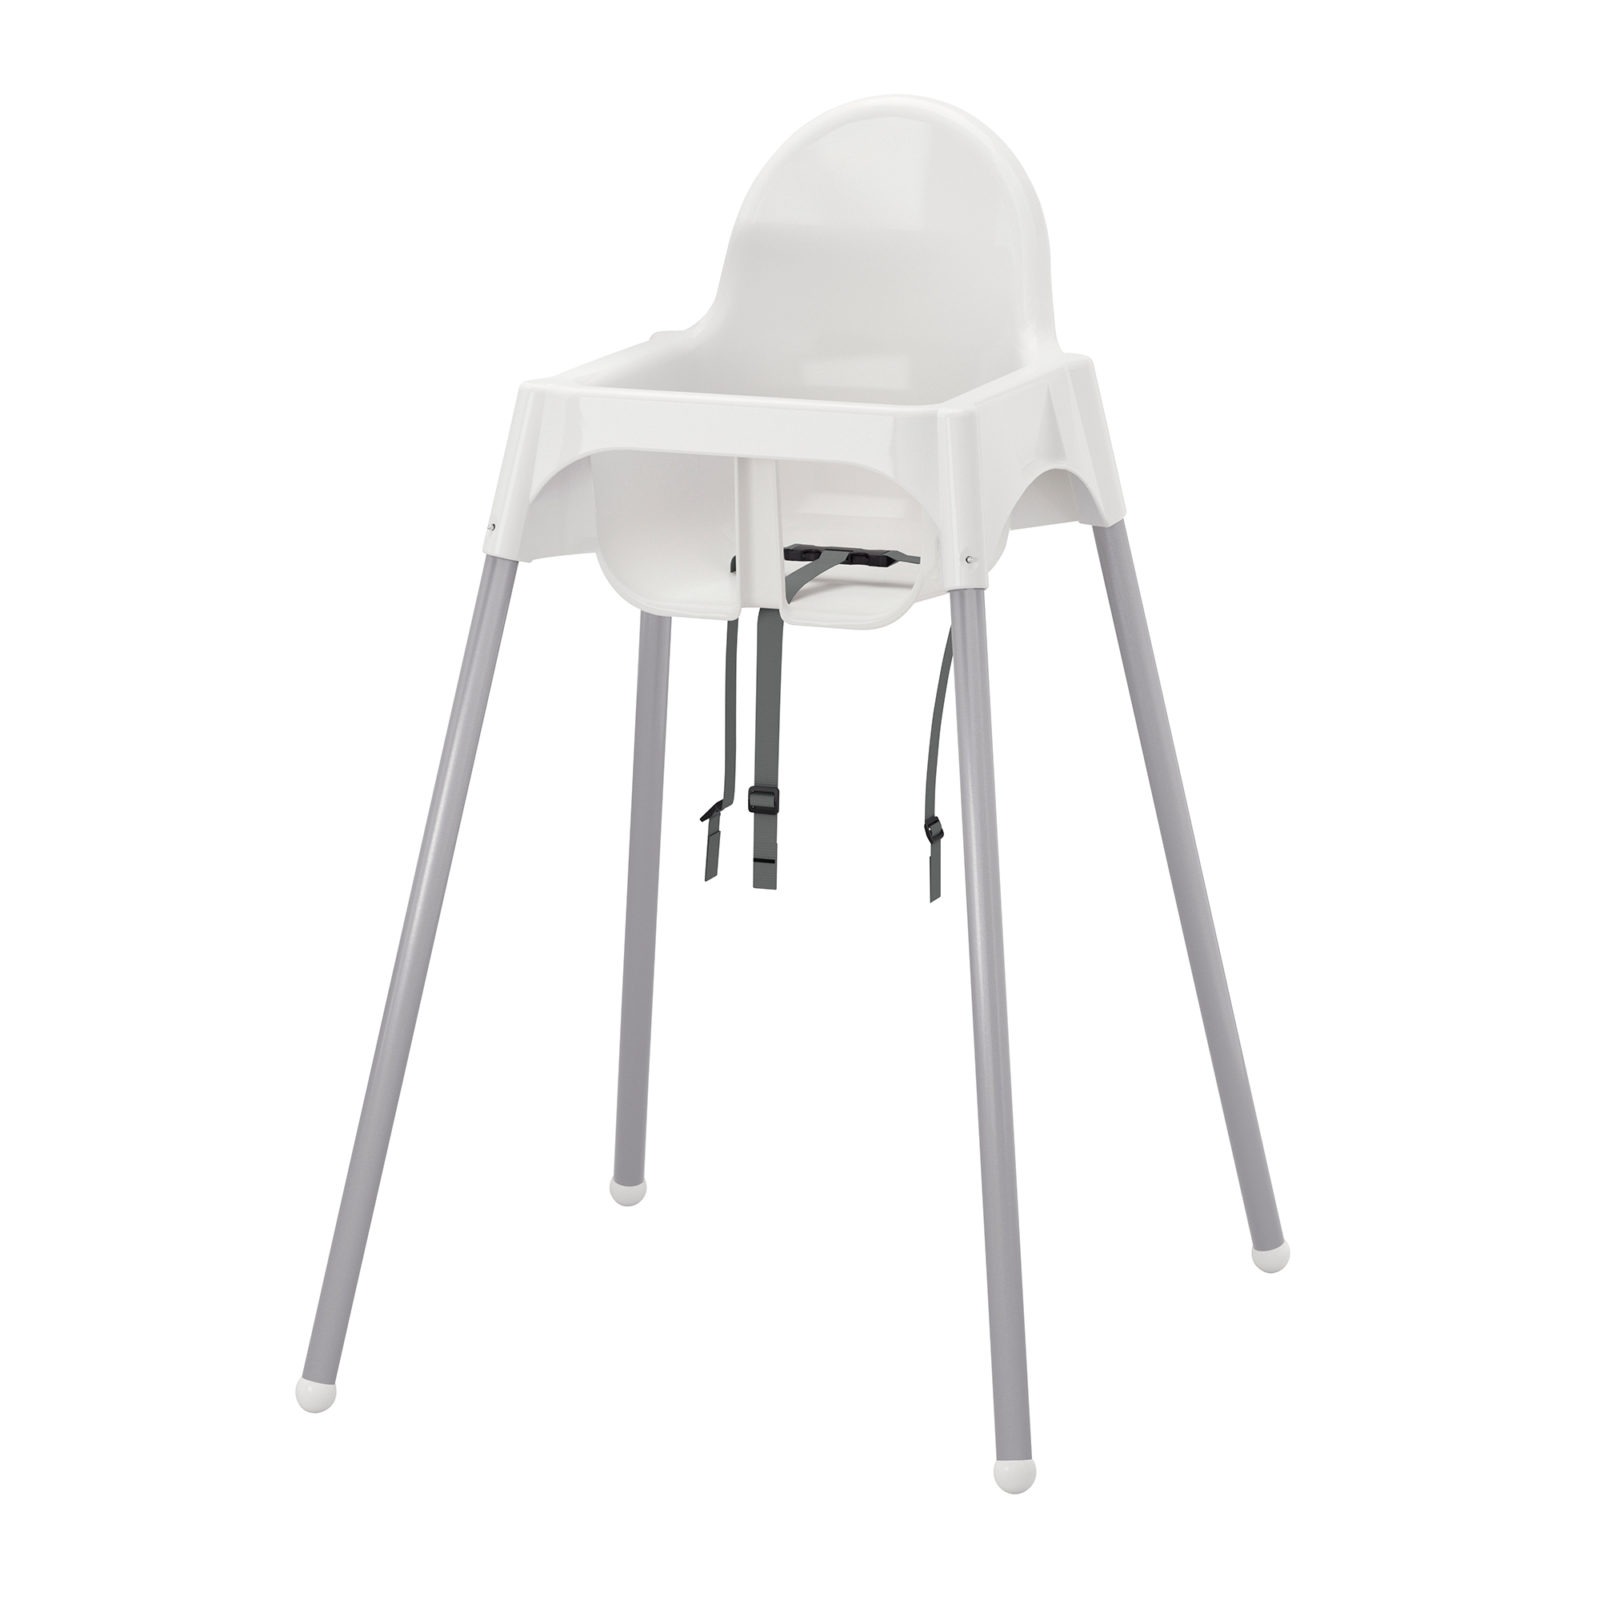 High chair for children with white plastic seat and grey metal legs, ANTILOP.